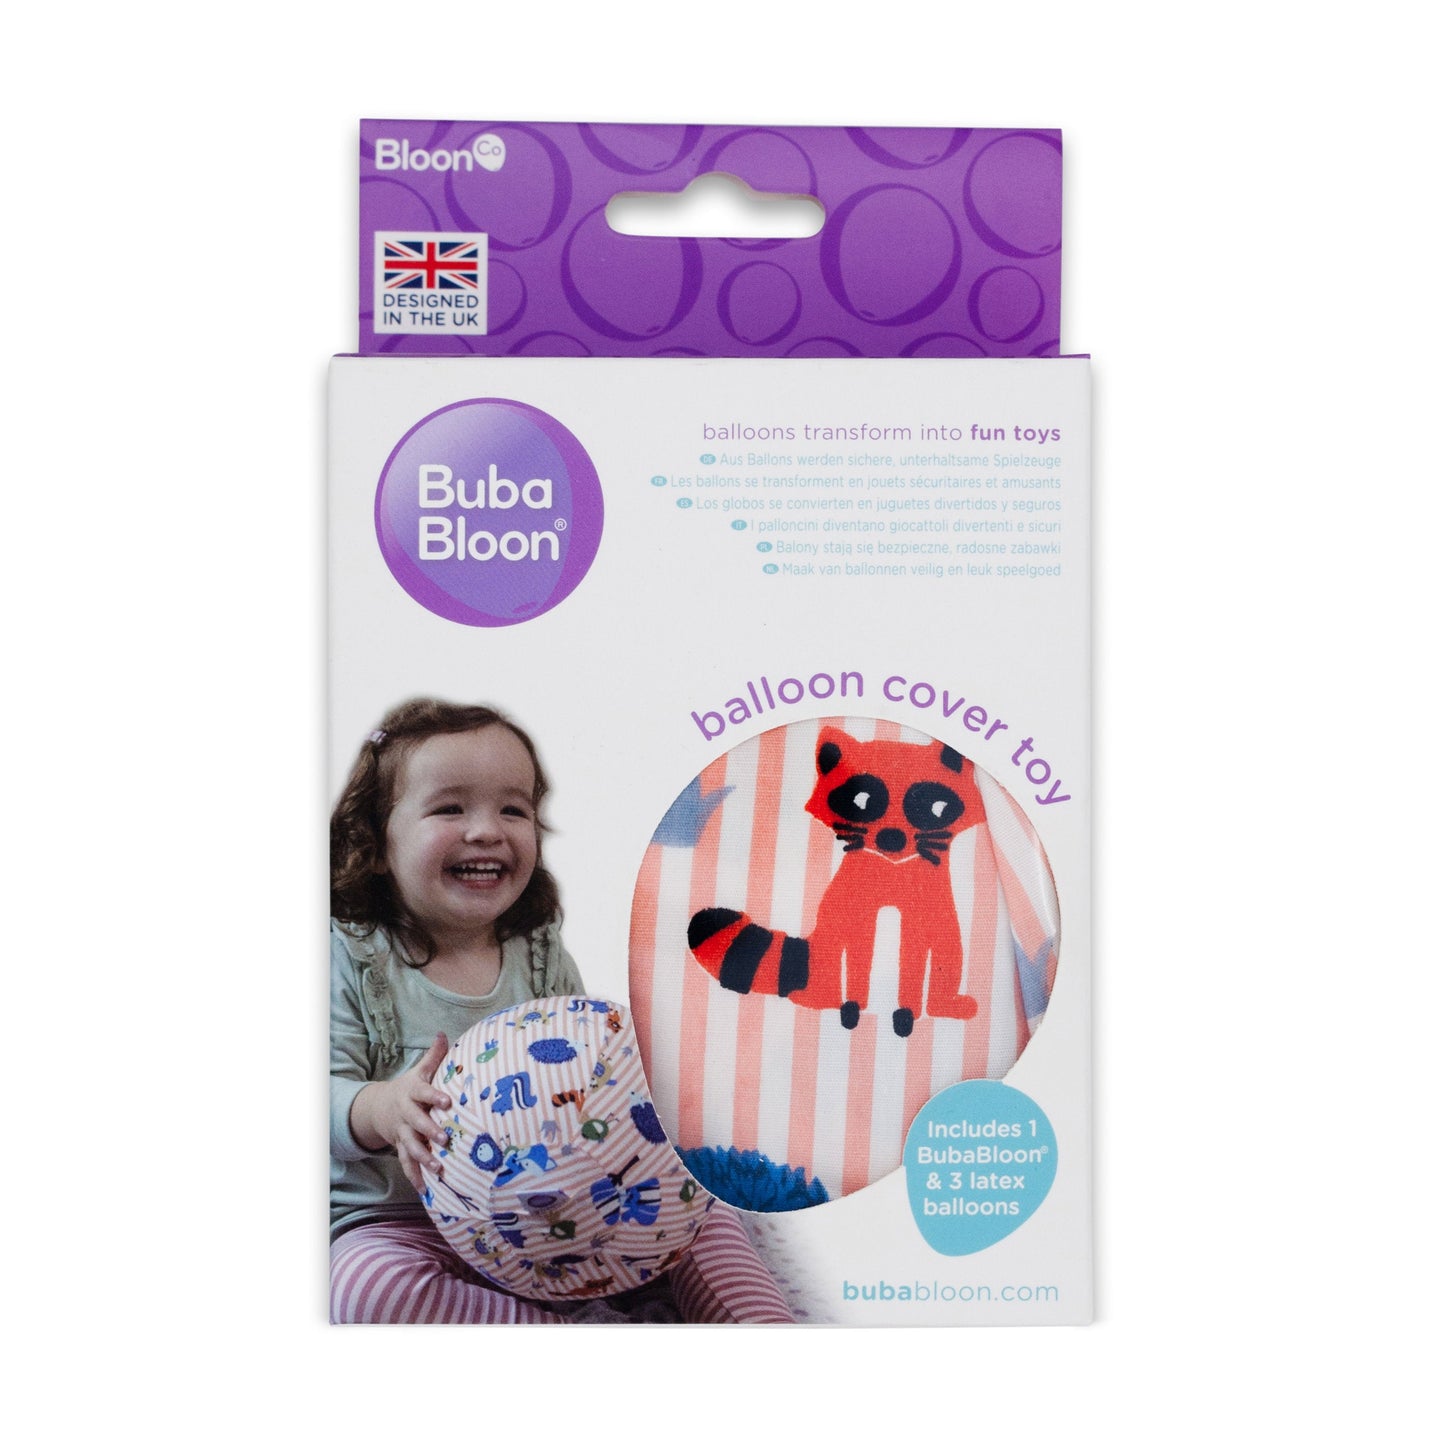 BubaBloon Animal Stripes Pink Cotton Balloon Cover Toy